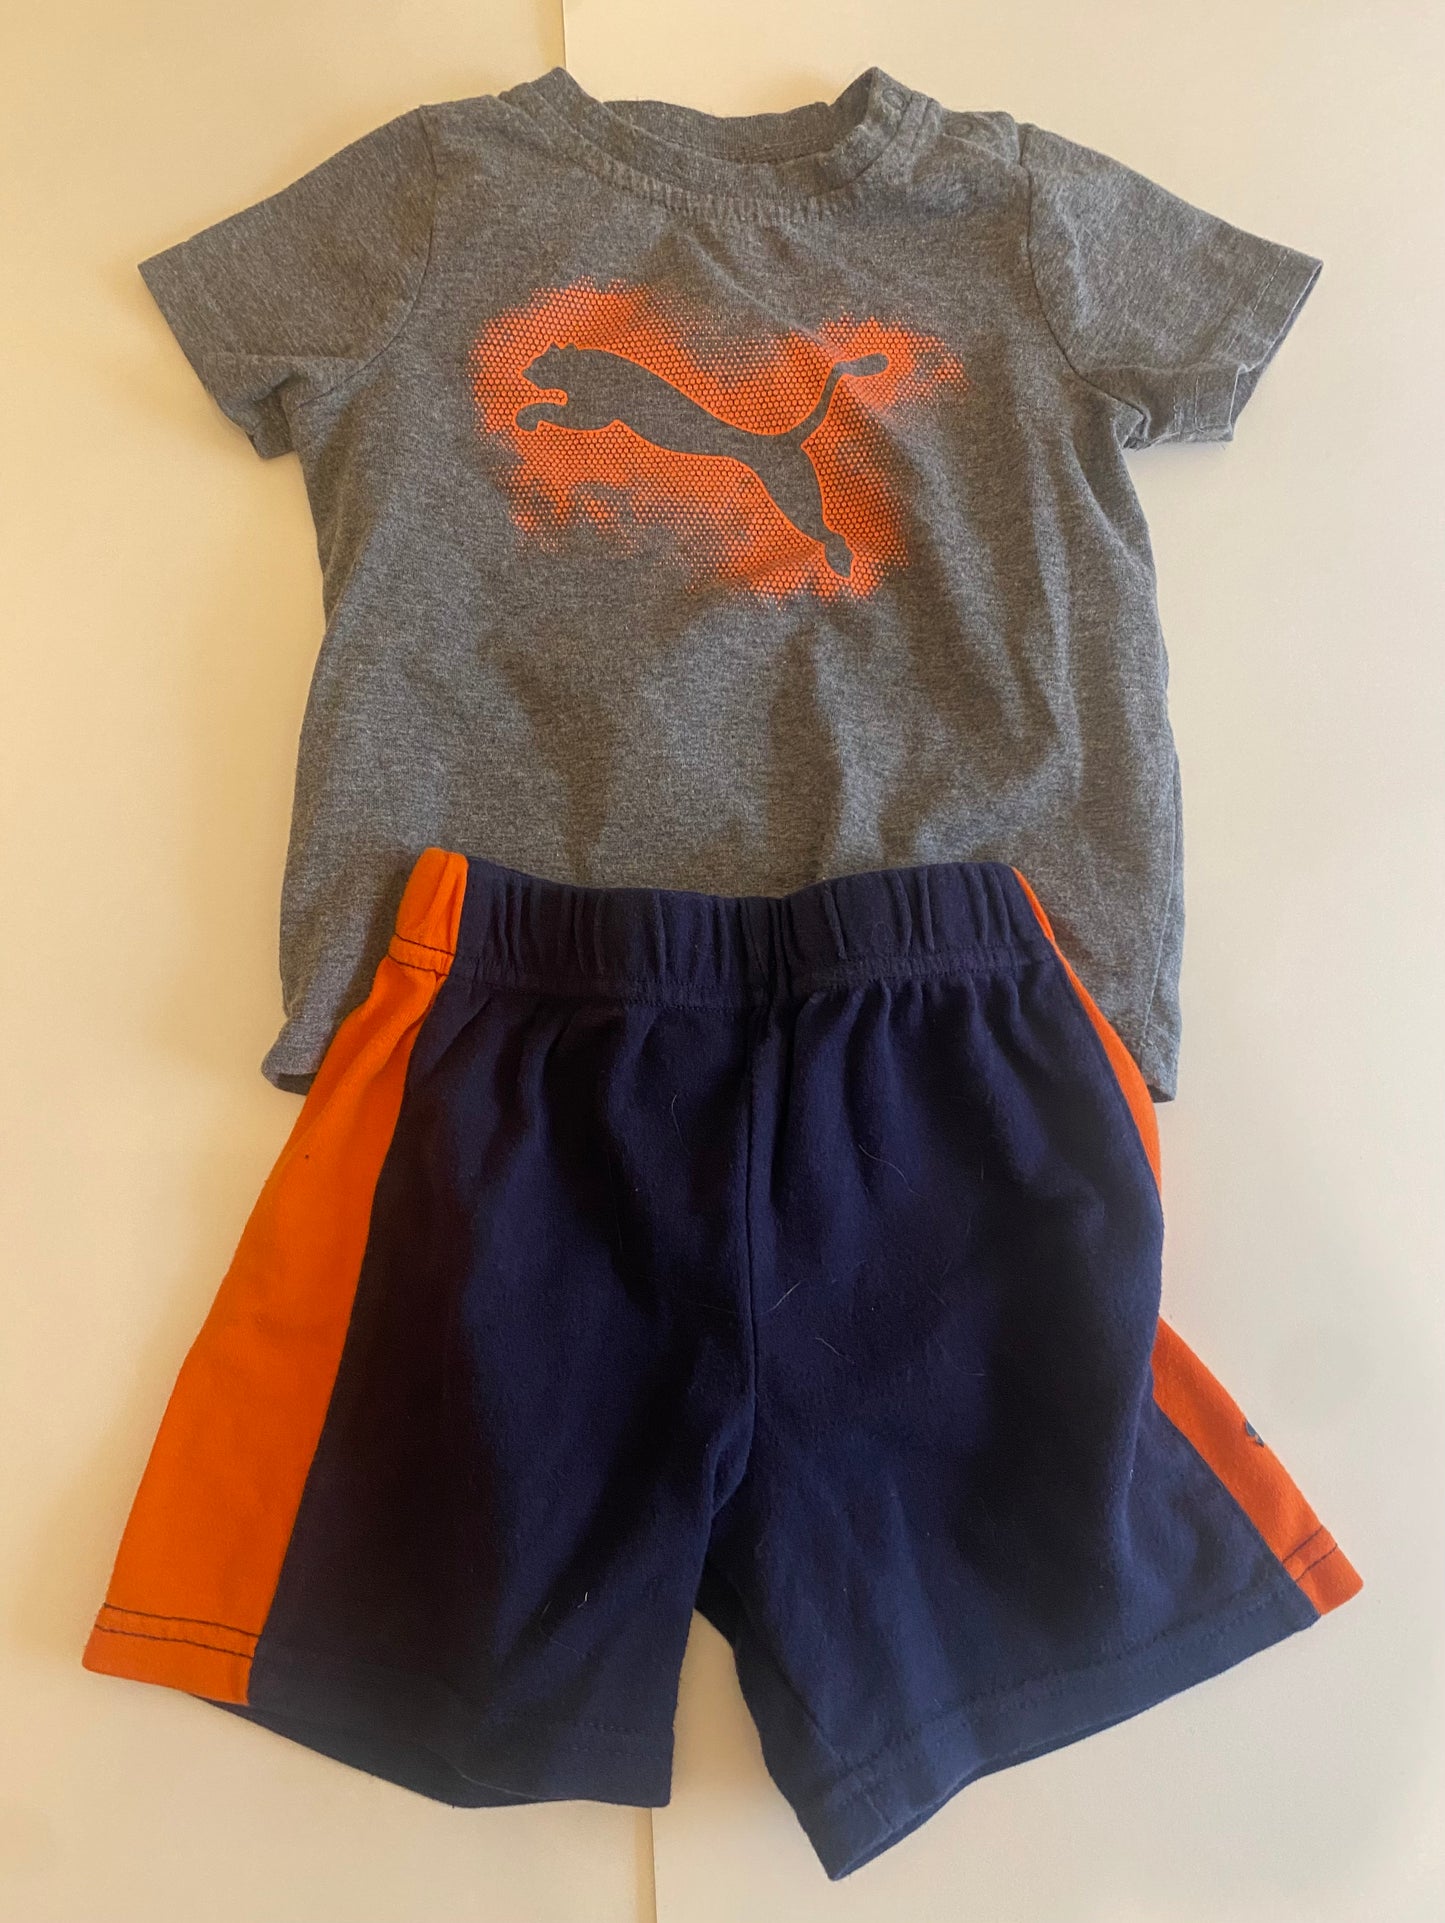 Boys 18 mo outfit